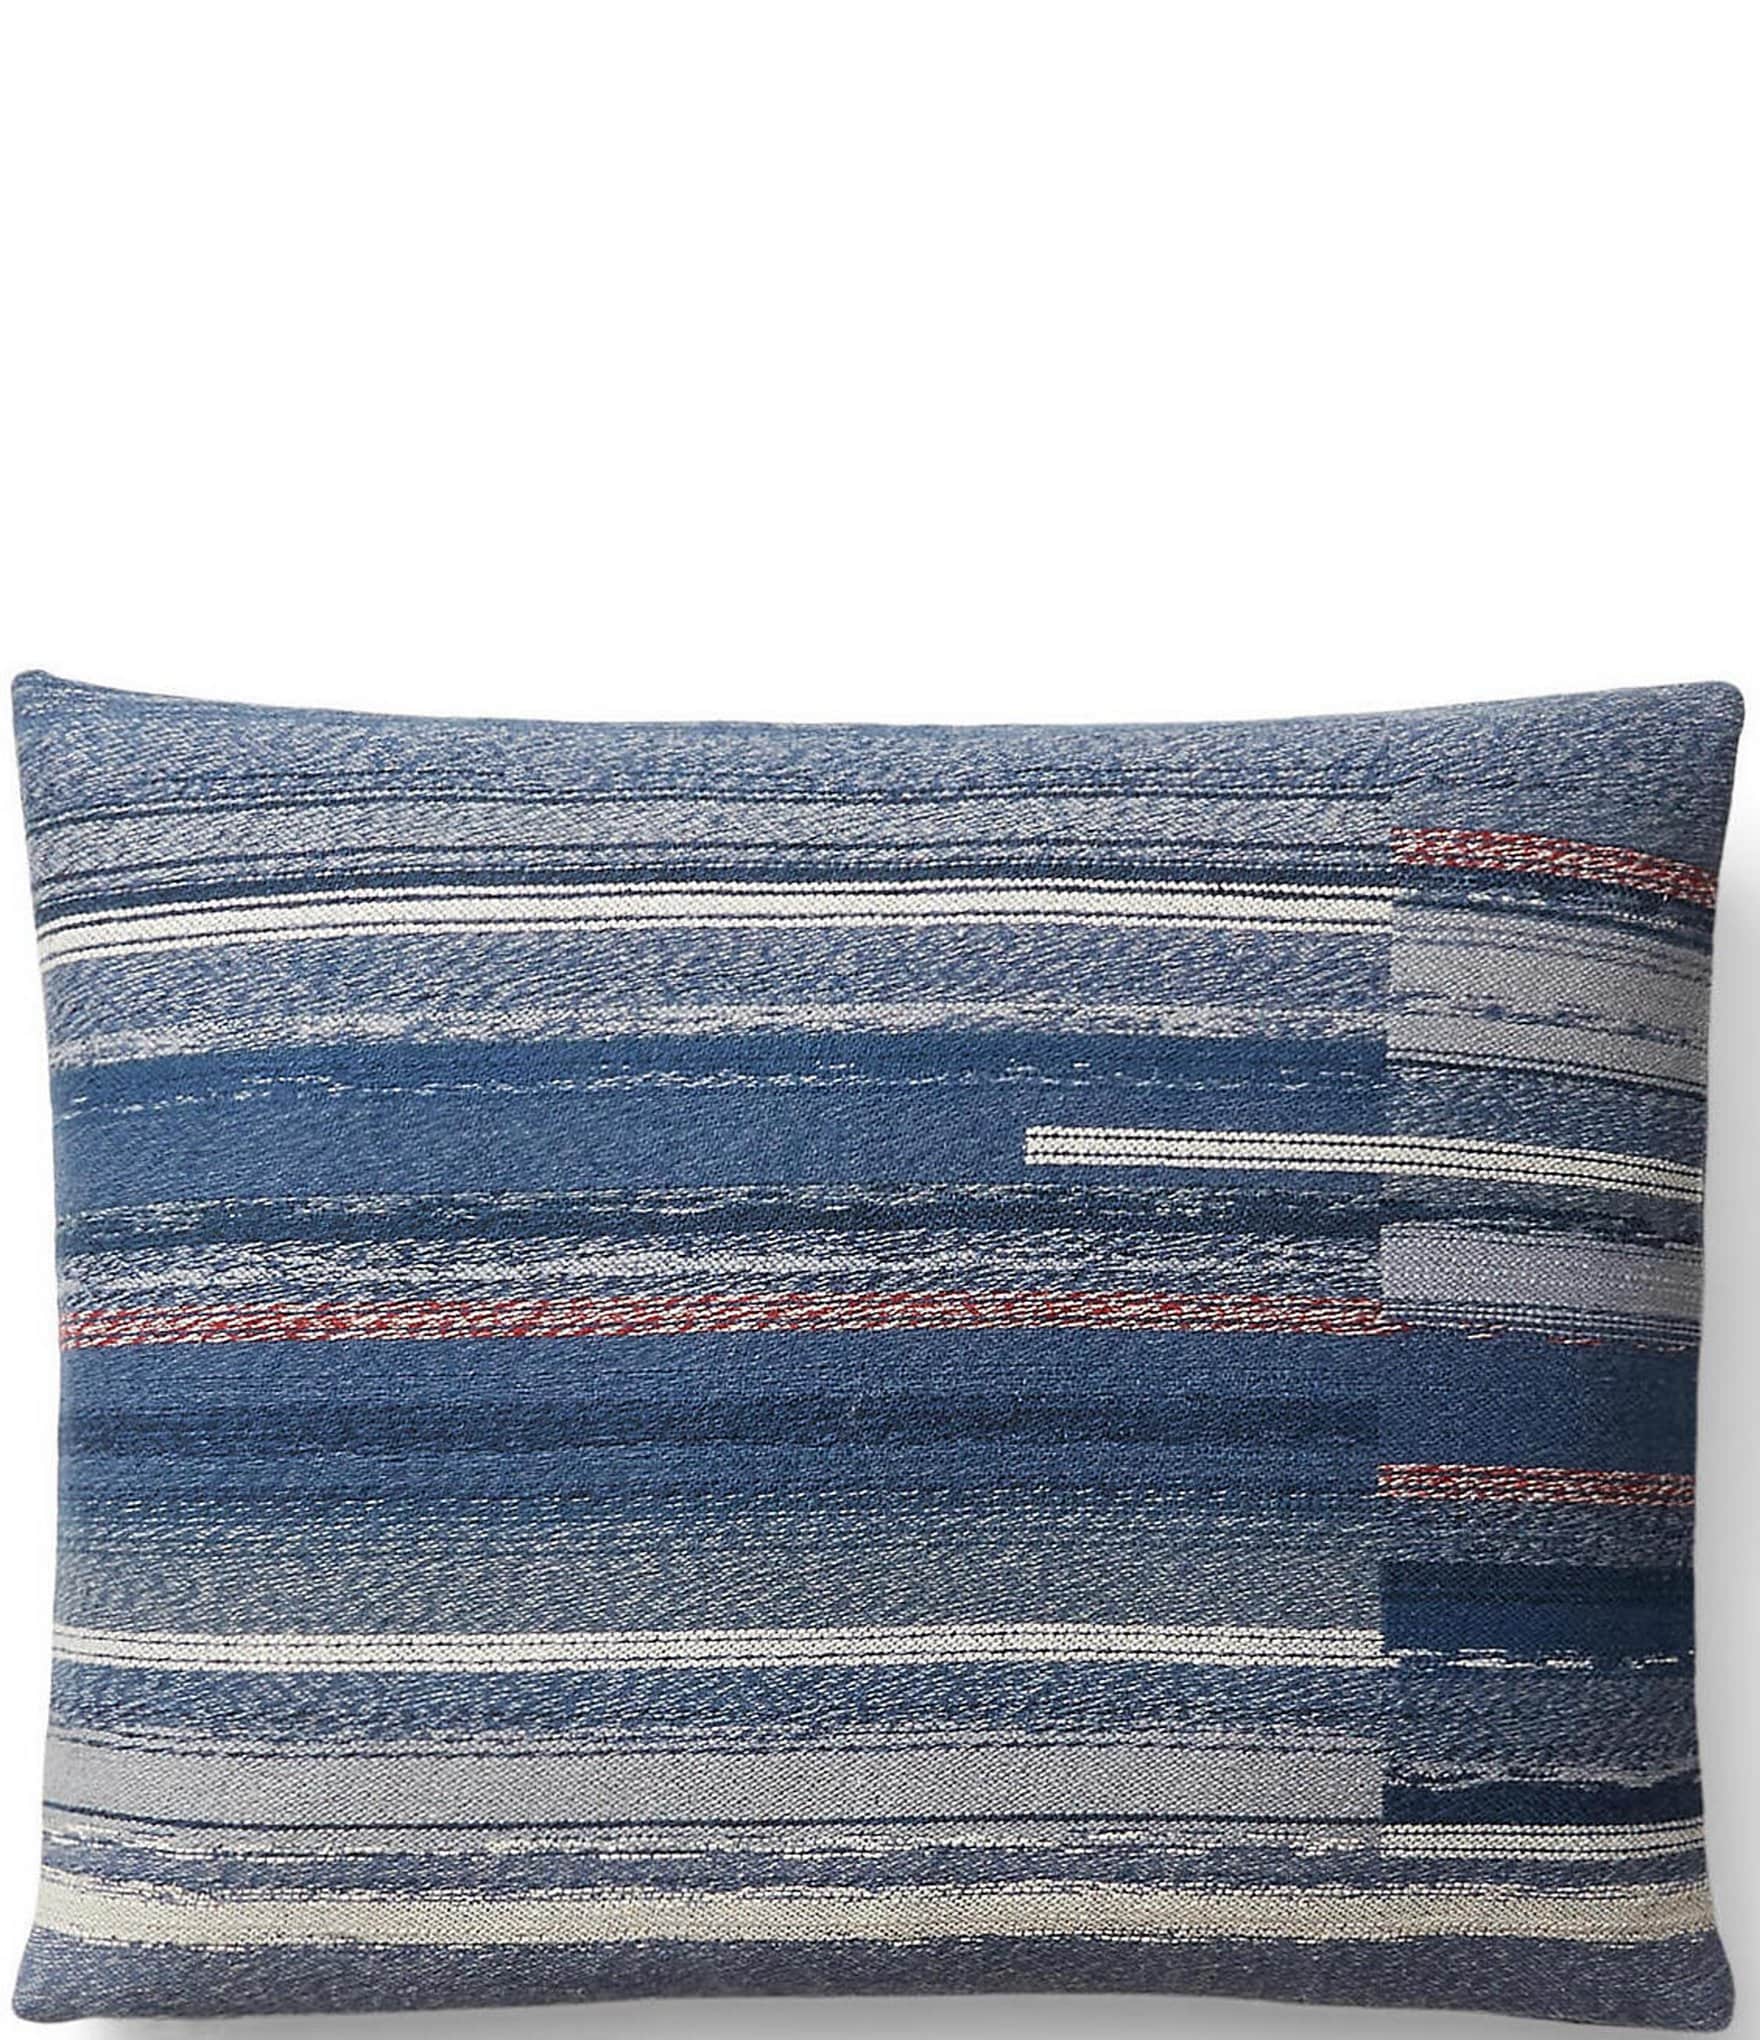 Ralph Lauren Set of White, Grey, Red, and Blue Rustic Throw Pillows